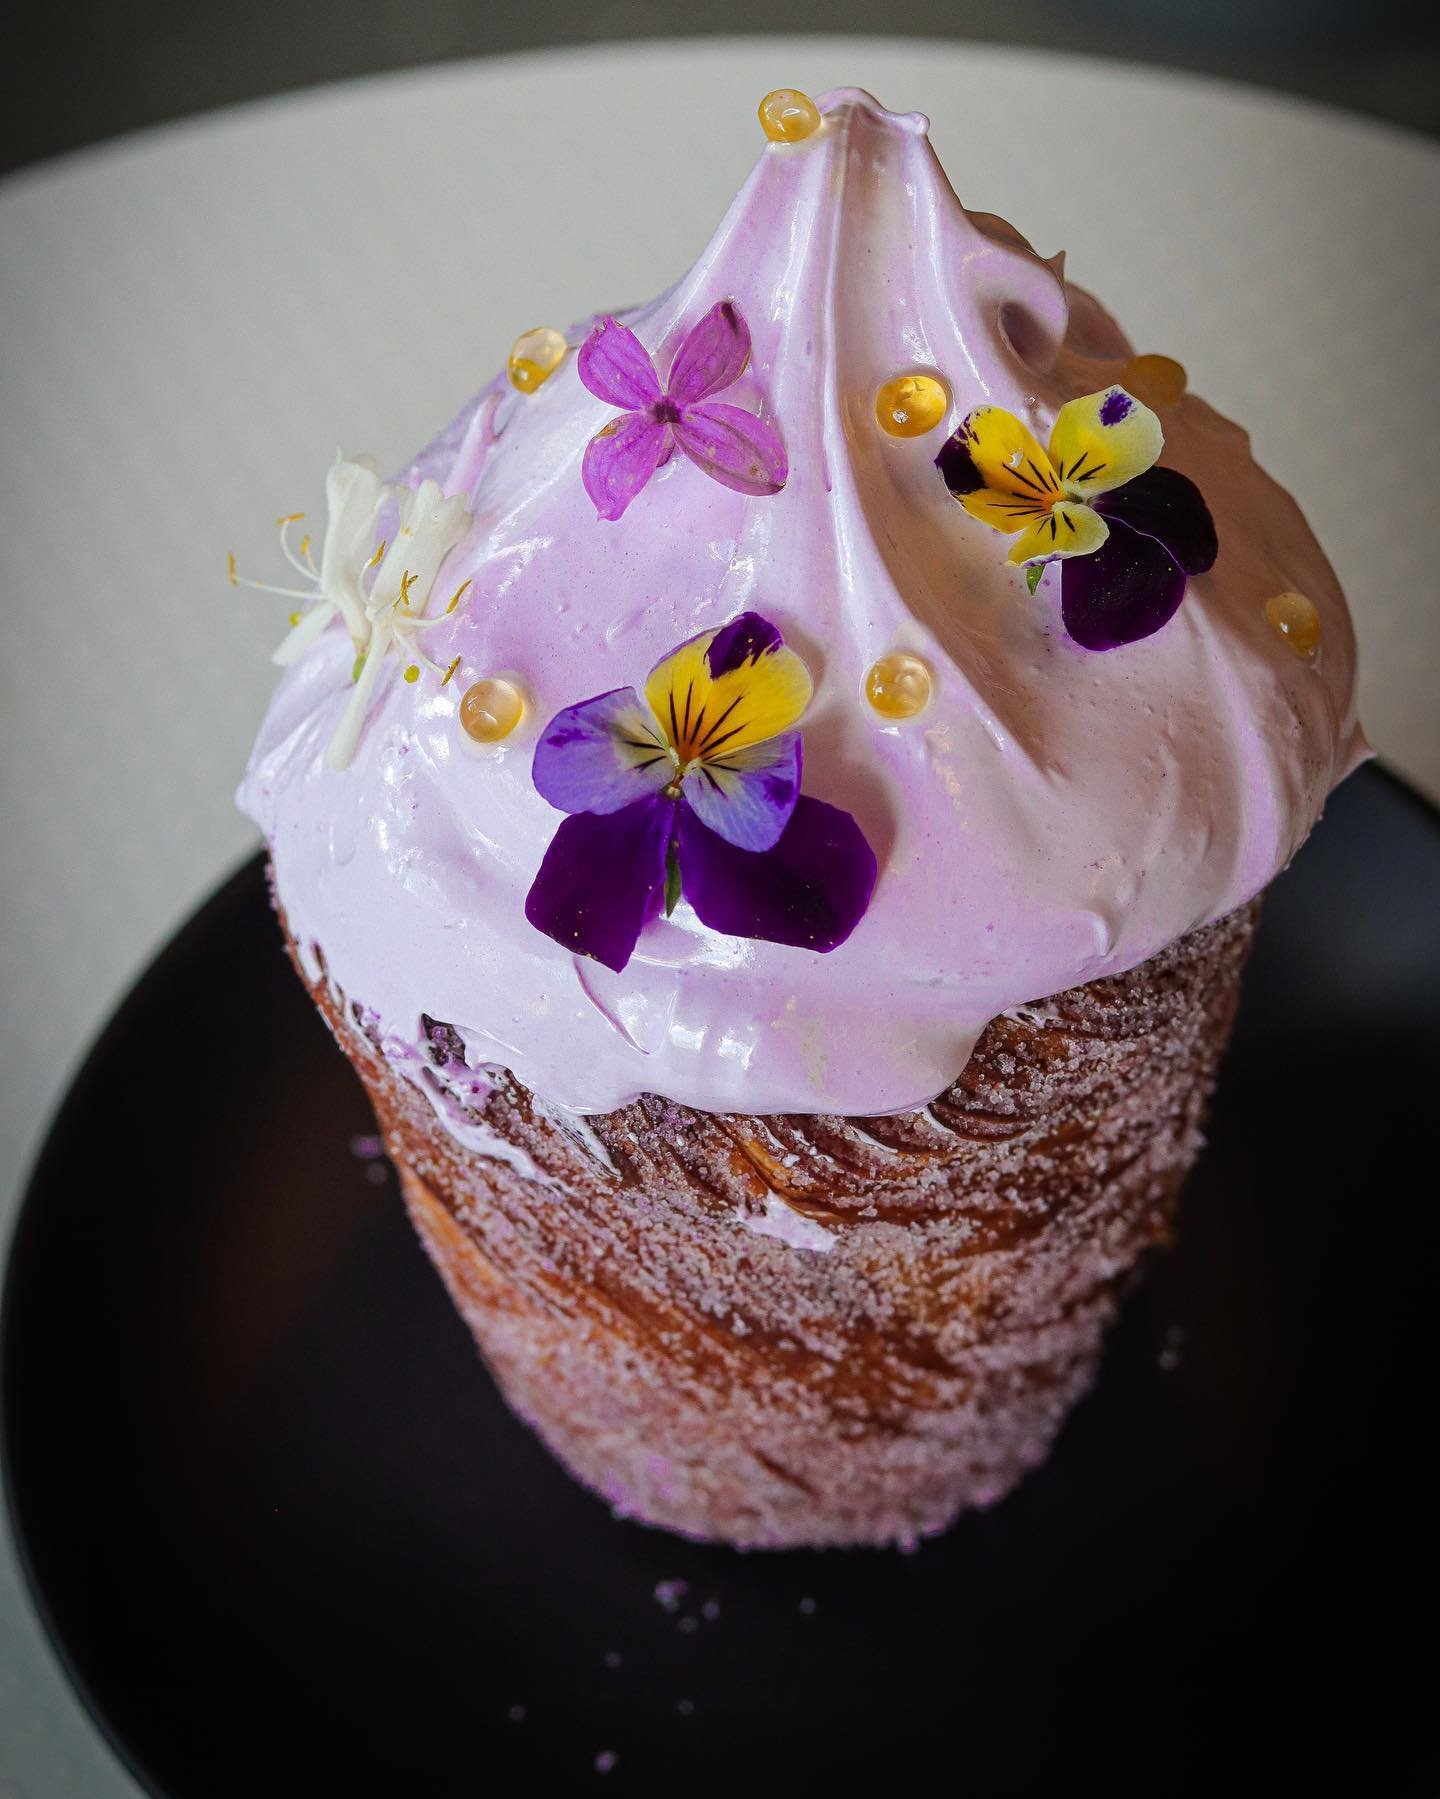 WE KNOW WHAT MOM WANTS. 
It&rsquo;s this Passionfruit Ube Meringue Cruffin. Duh.

Created and made with LOTS of love, this Cruffin starts off with our 48 our croissant dough and is coated in an Ube sugar. Filled with passionfruit cream and topped wit